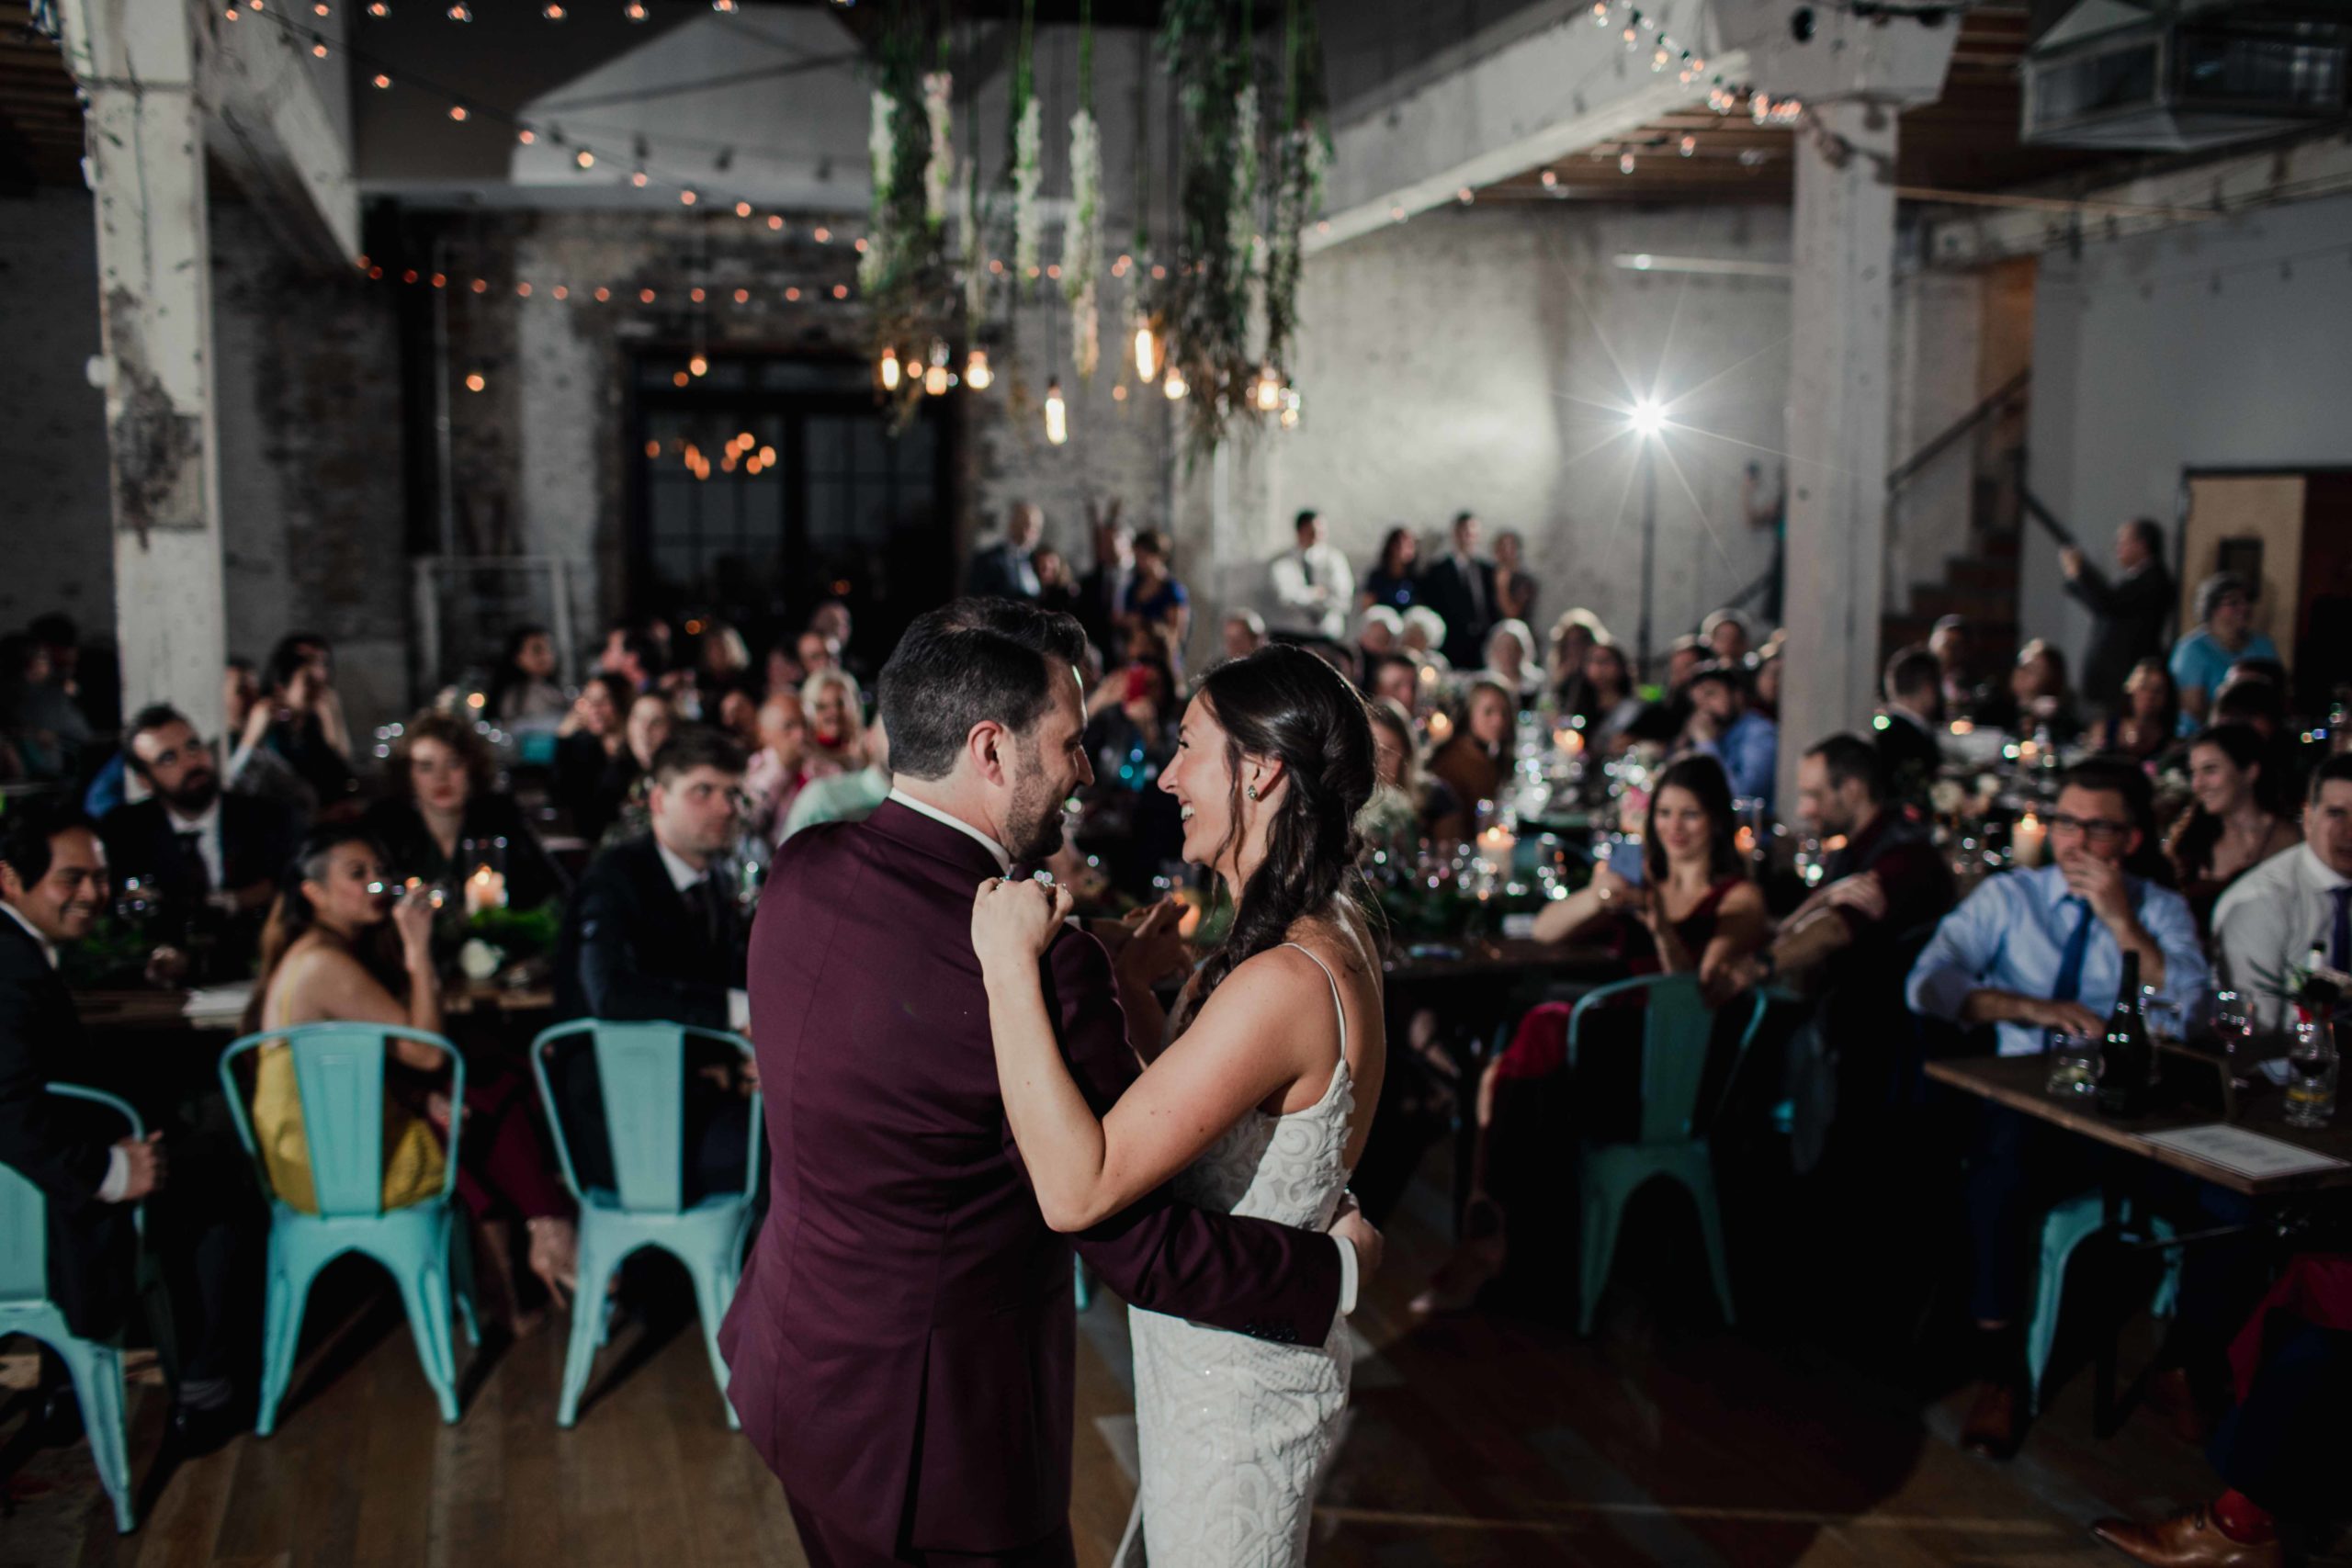 Chicago Illinois Wedding Photography first dance at reception at the Joinery